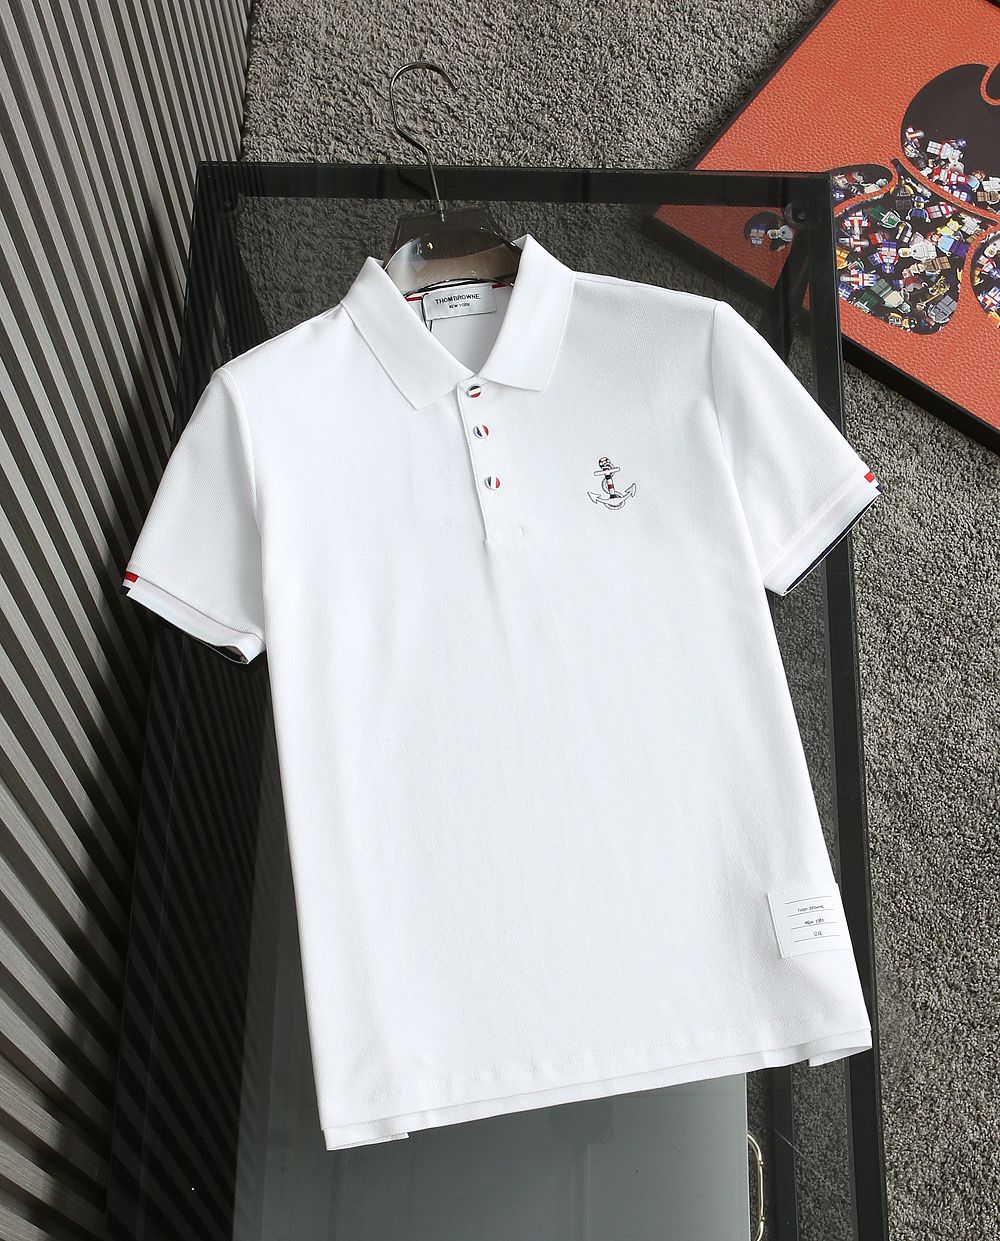 Boat Anchor Embroidered Short Sleeve Polo Shirts